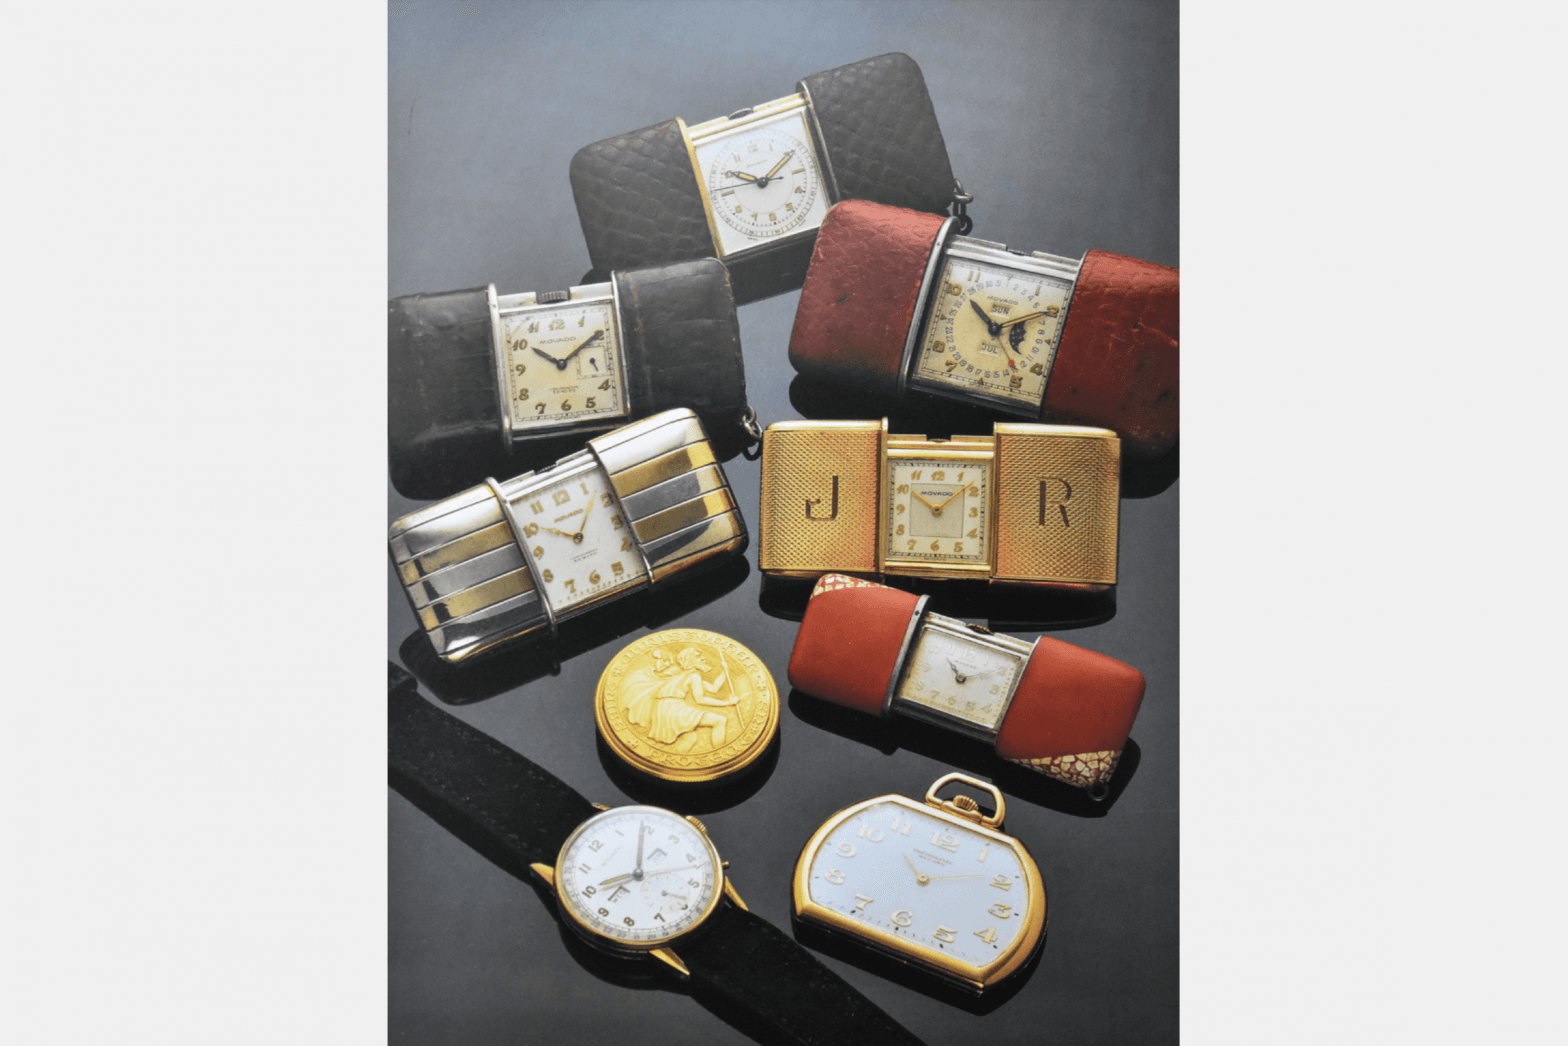 Andy Warhol’s Movado collection included various Ermetos, a Ref. 44776, a coin watch and also a pocket watch